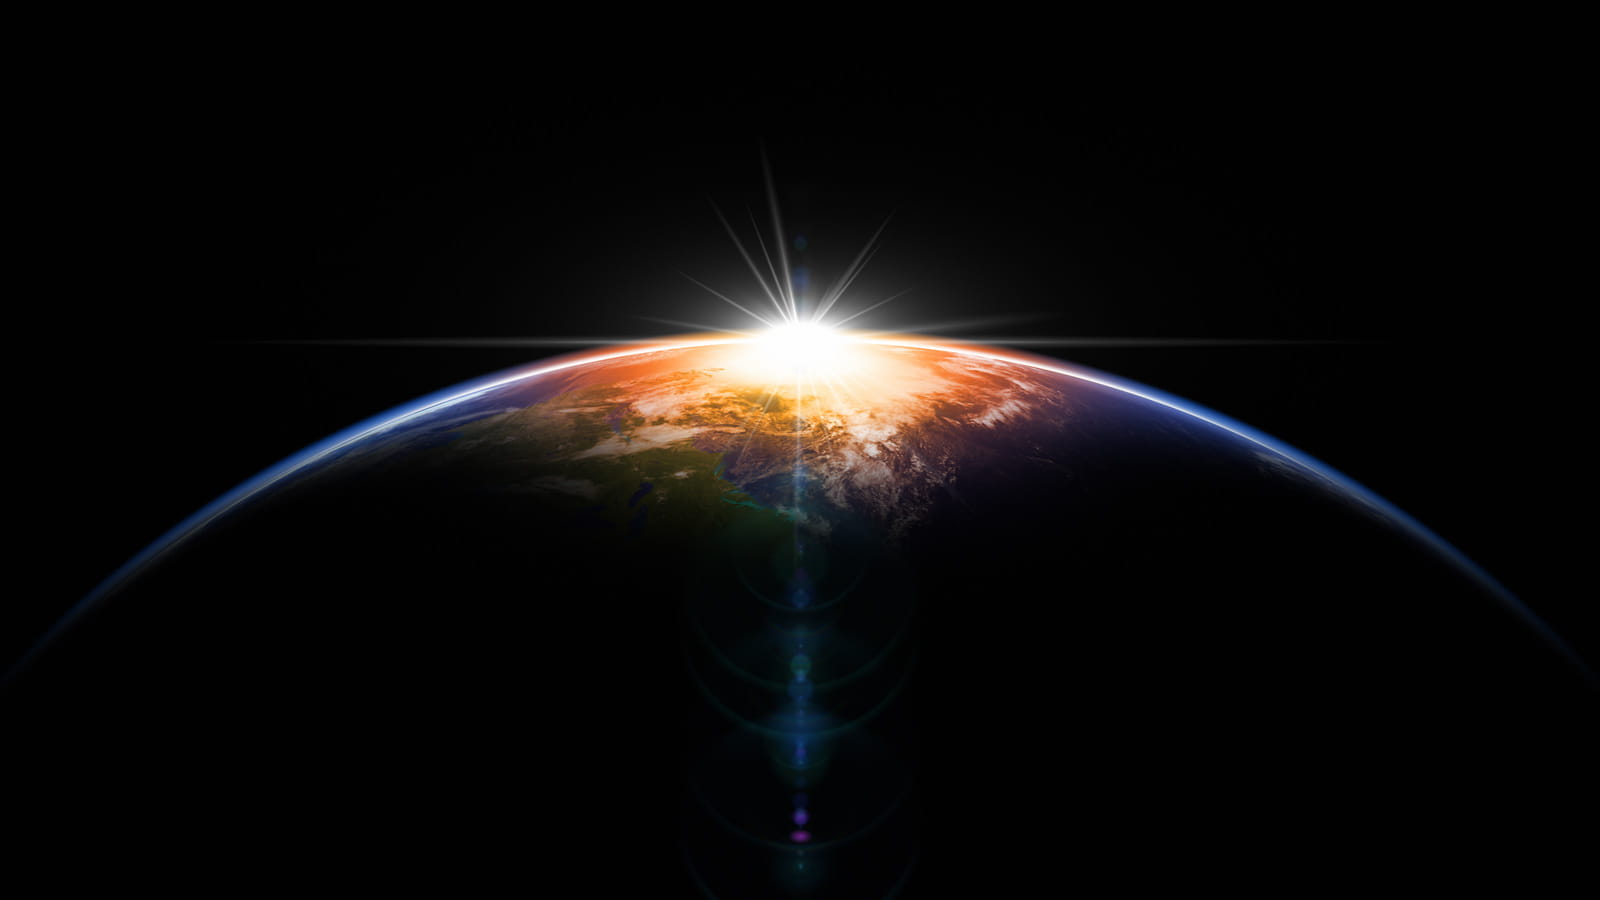 Bright light surrounds image of Earth